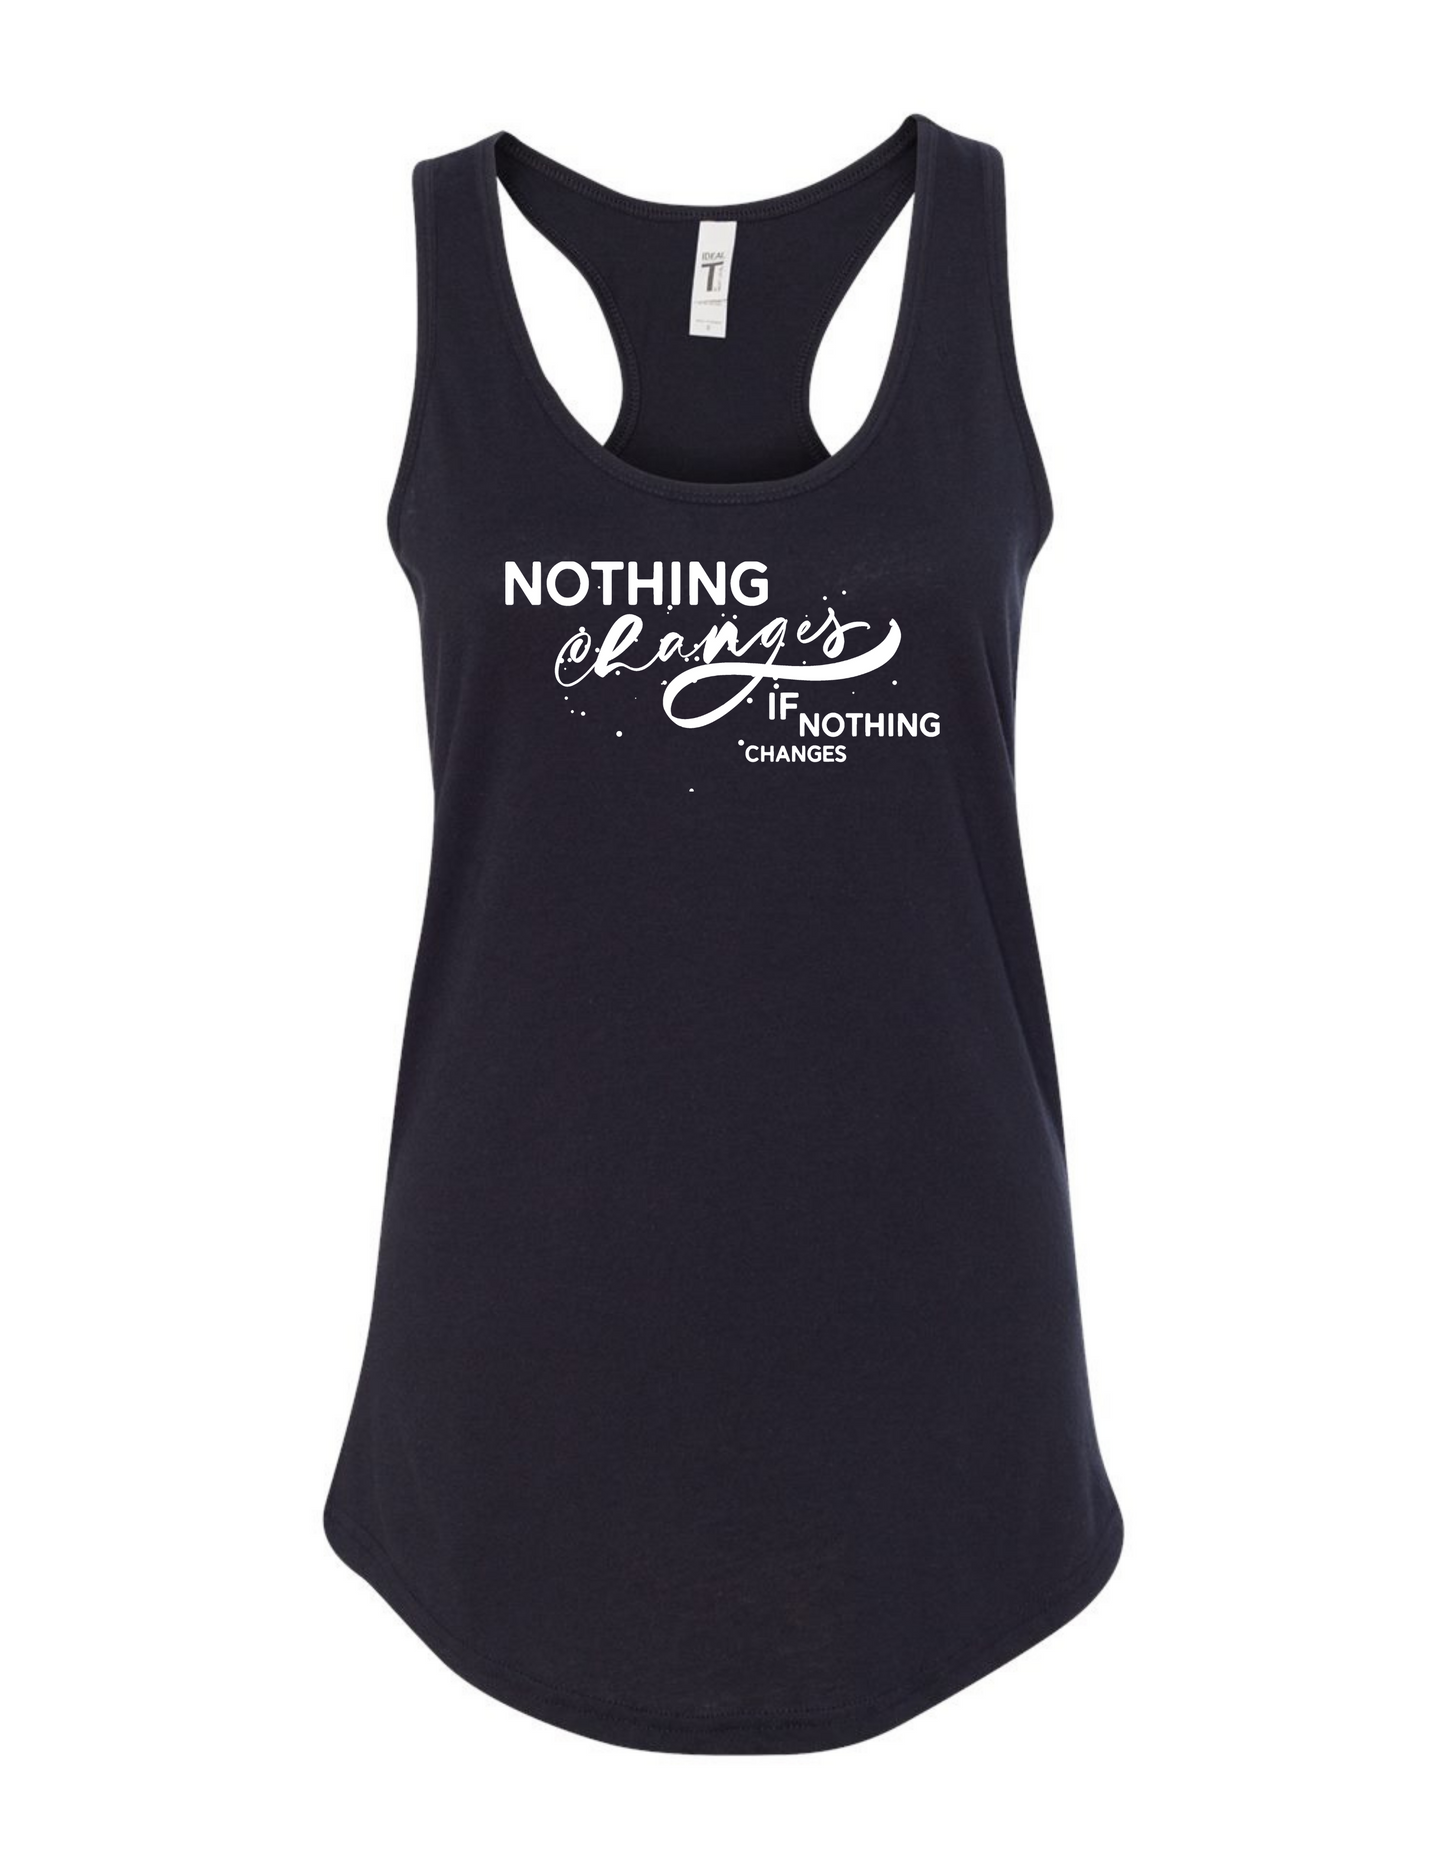 Nothing Changes if Nothing Changes - Racerback Ladies Tank - Mister Snarky's